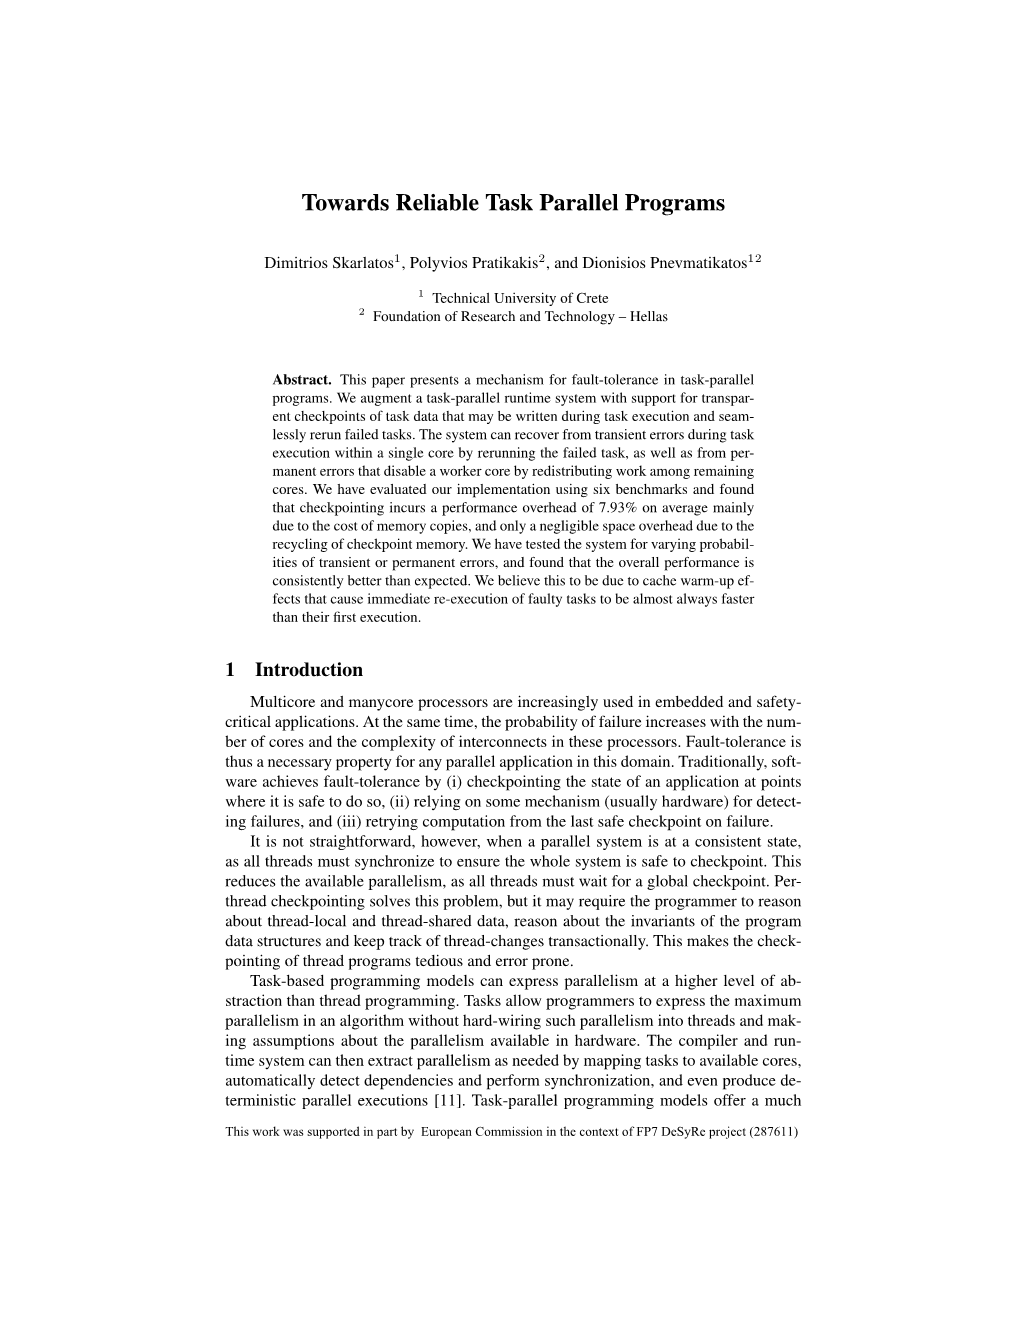 Towards Reliable Task Parallel Programs